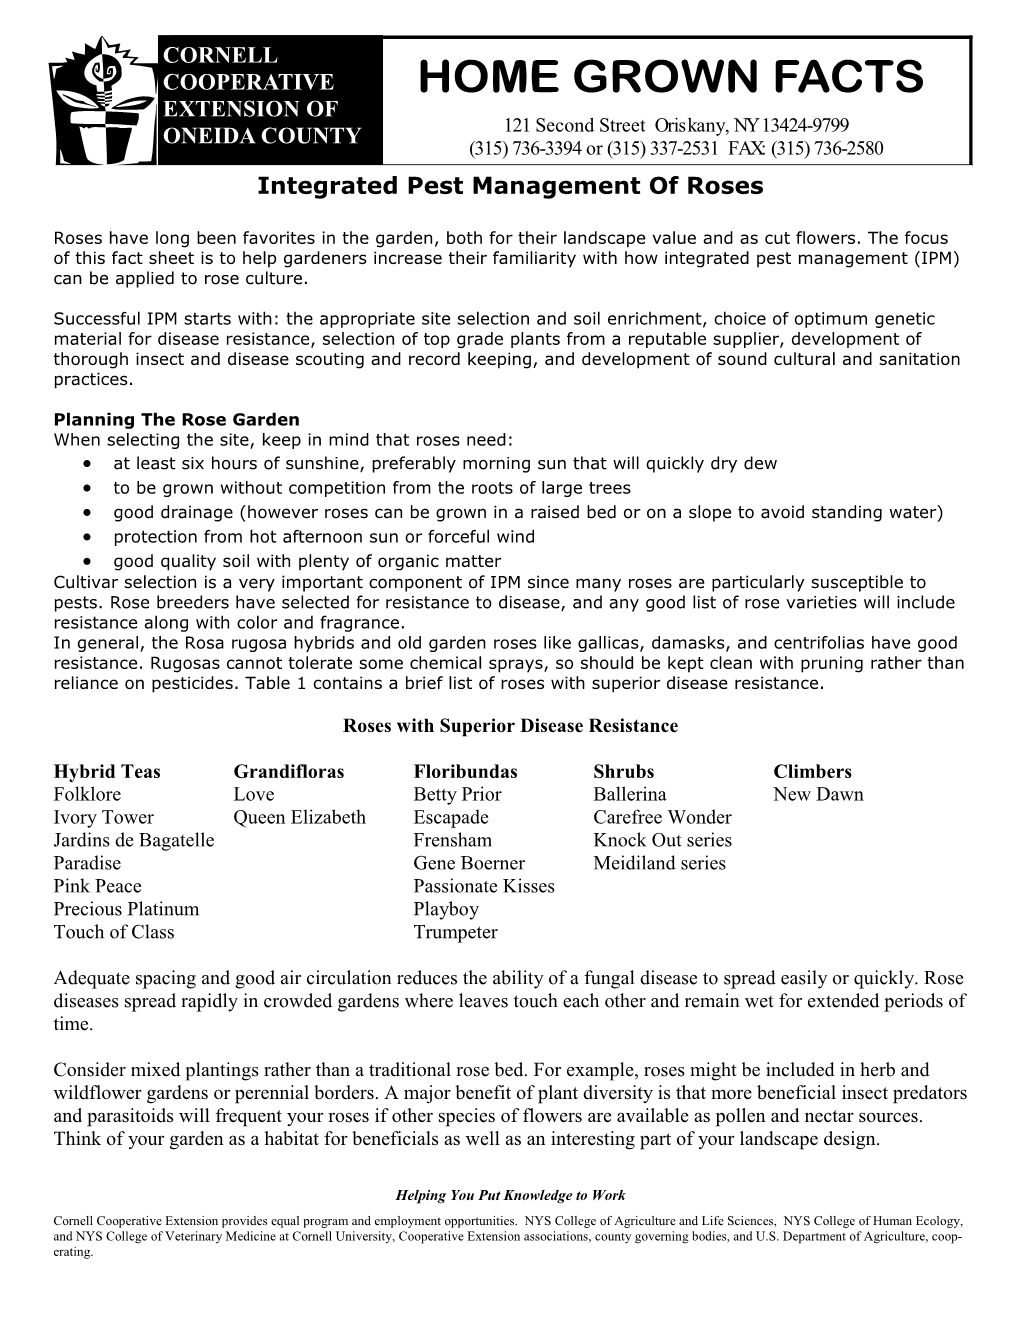 IPM (Integrated Pest Management) of Roses